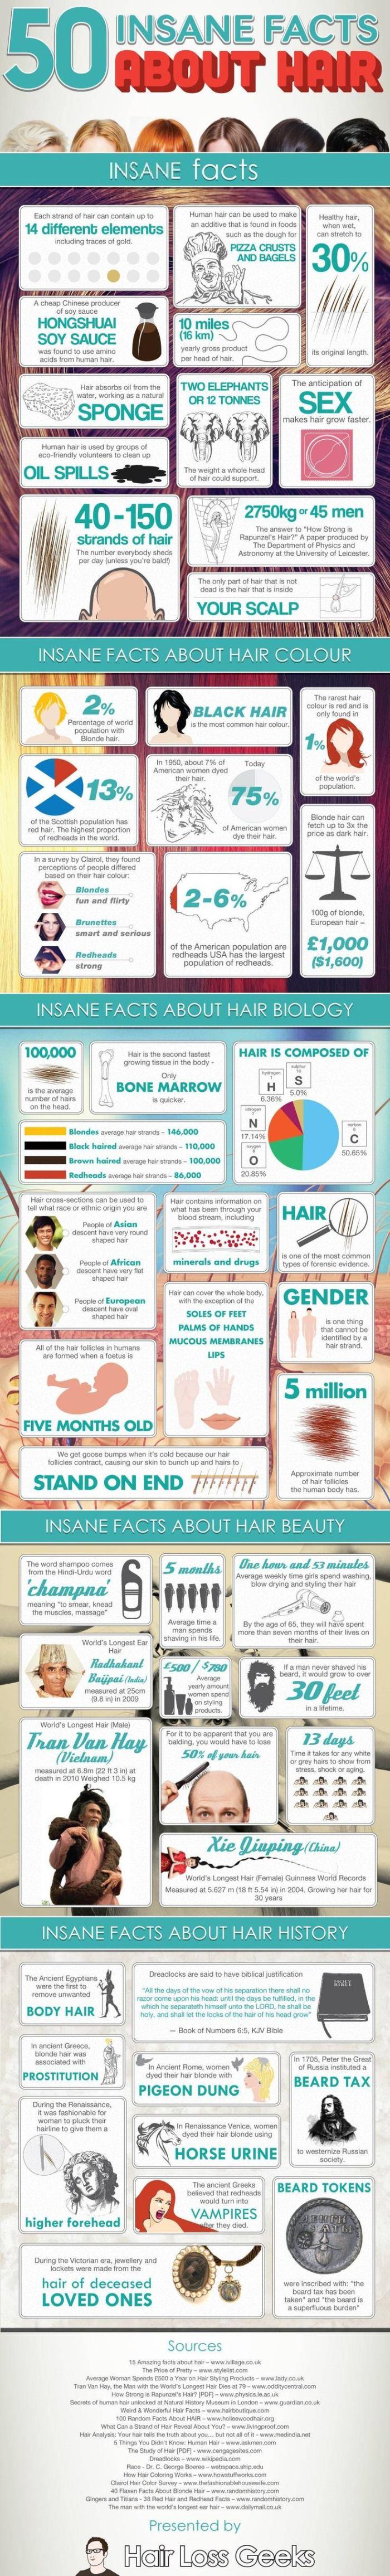 hair facts infographic